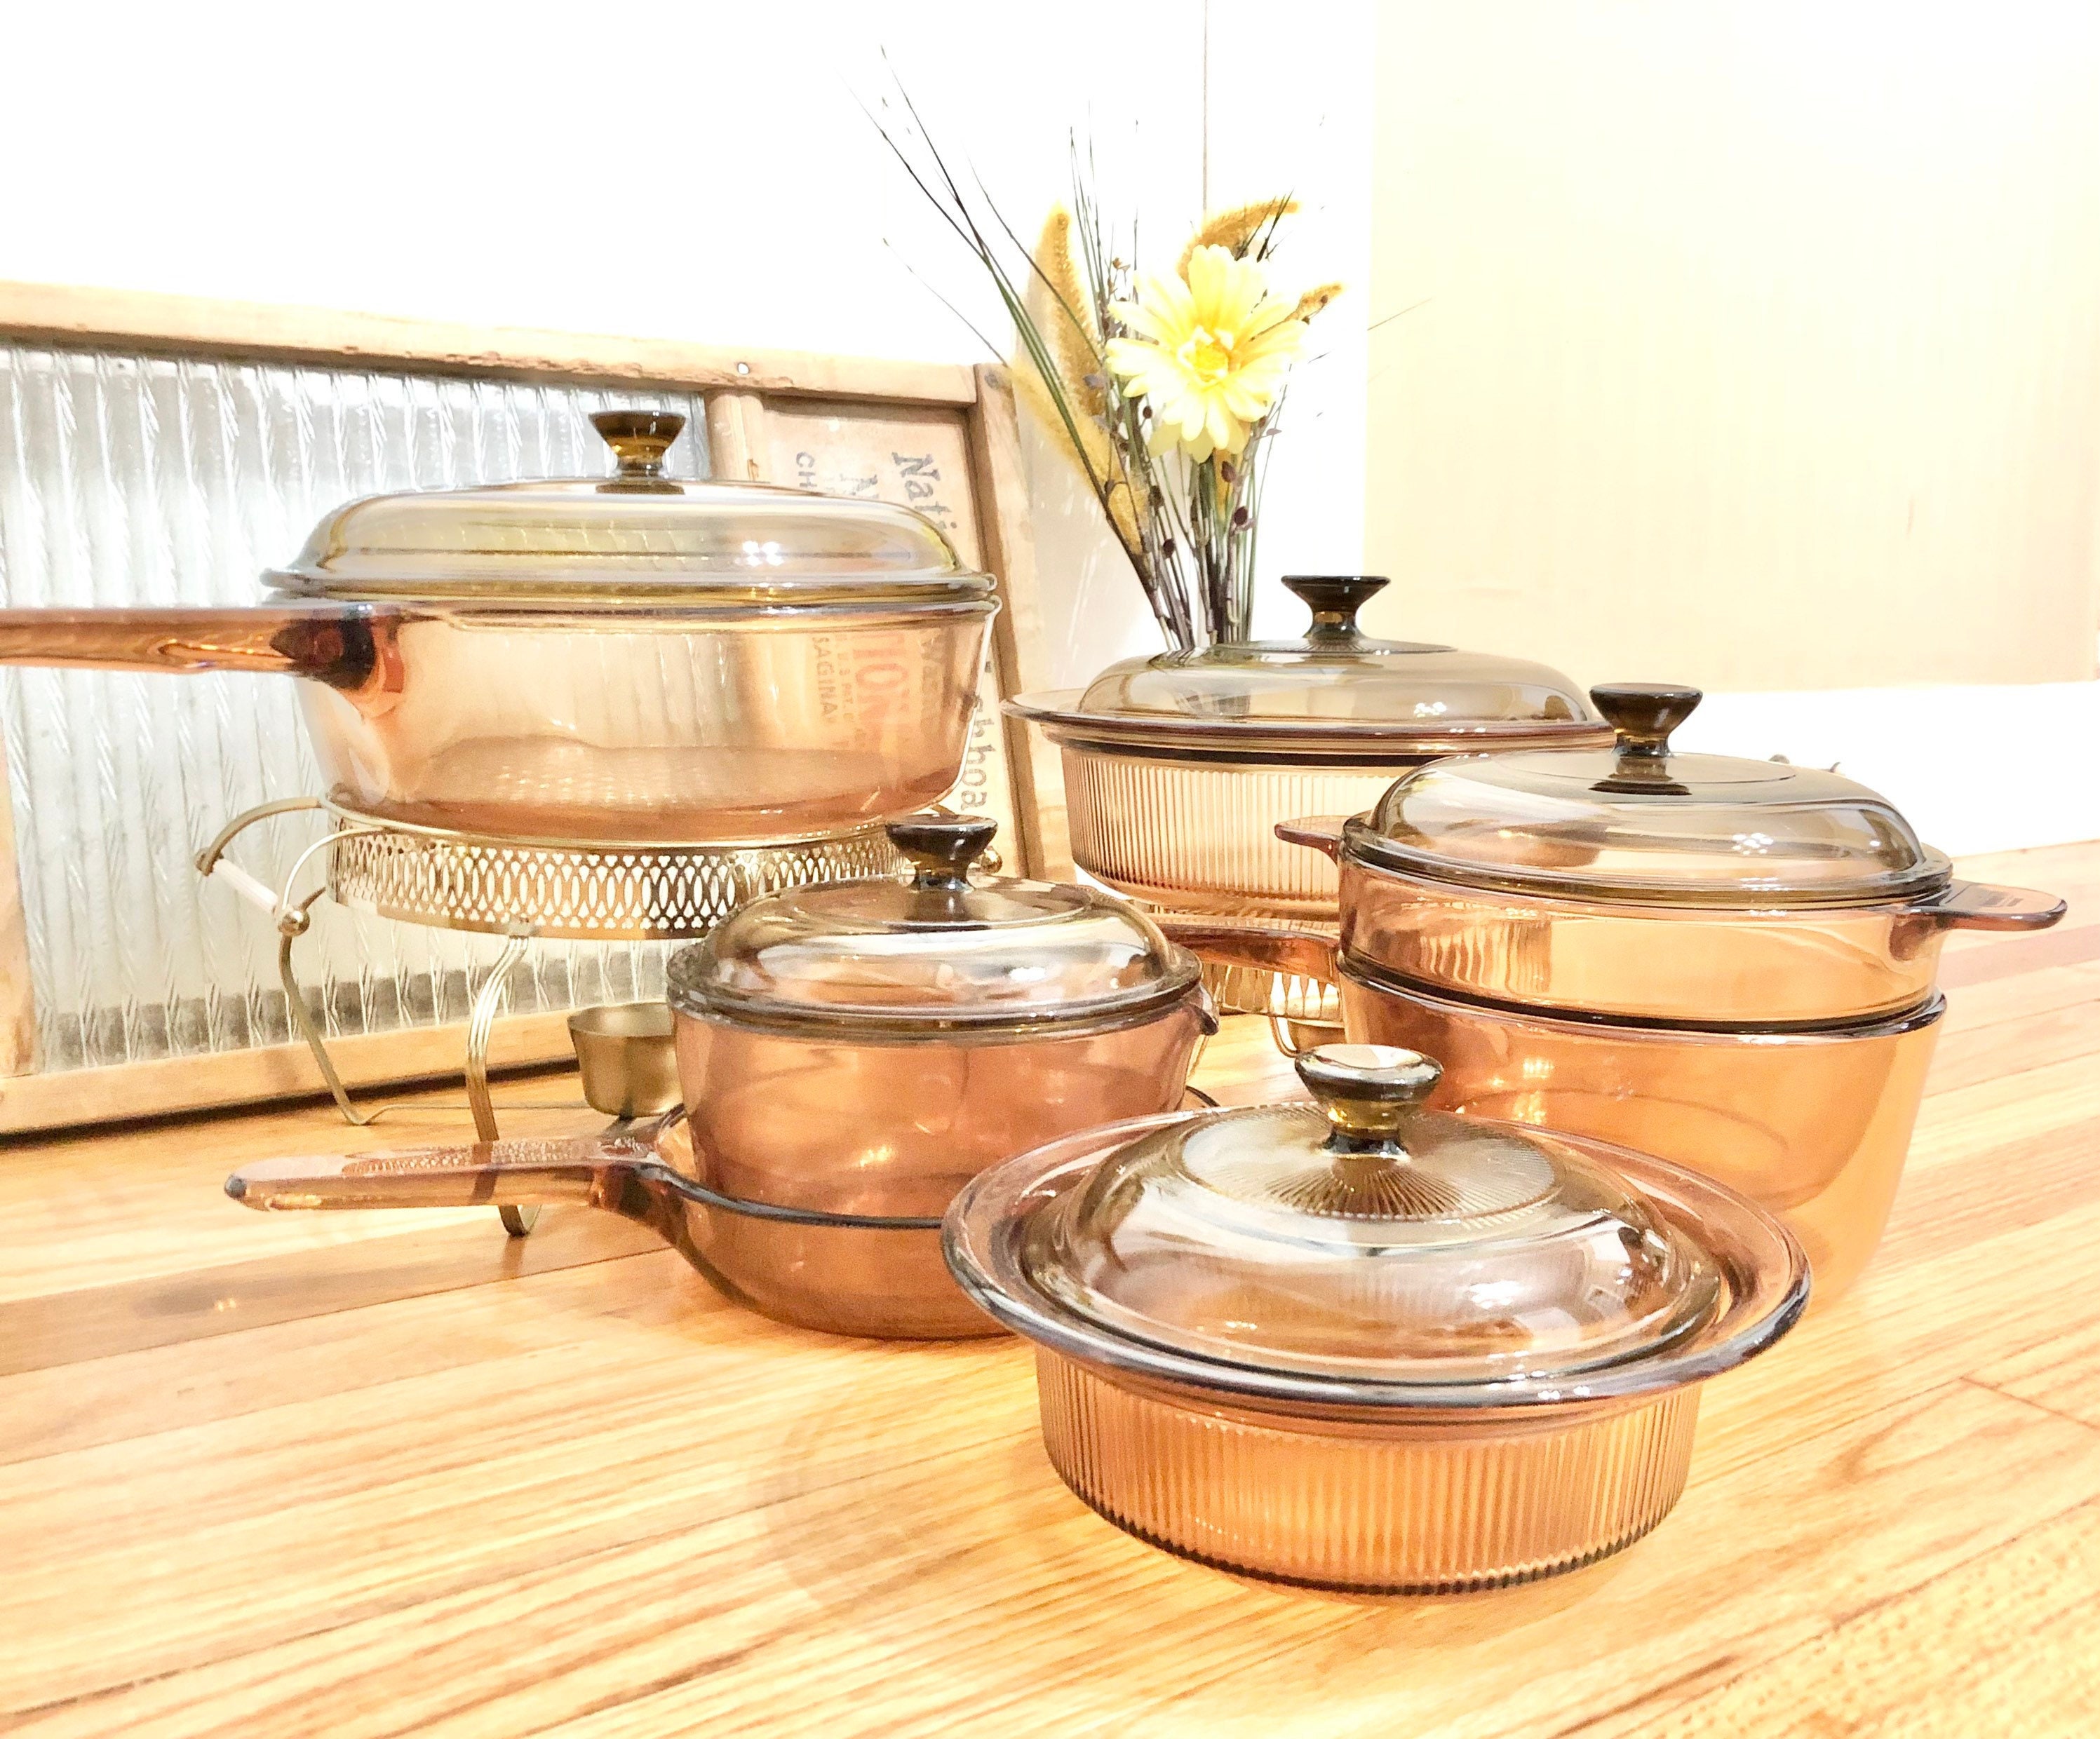 Vintage Corning Ware Pyrex Brown or Amber Visions Glass Cookware Set,  Saucepans and Skillet Replacement Pieces or Create Your Own Set 